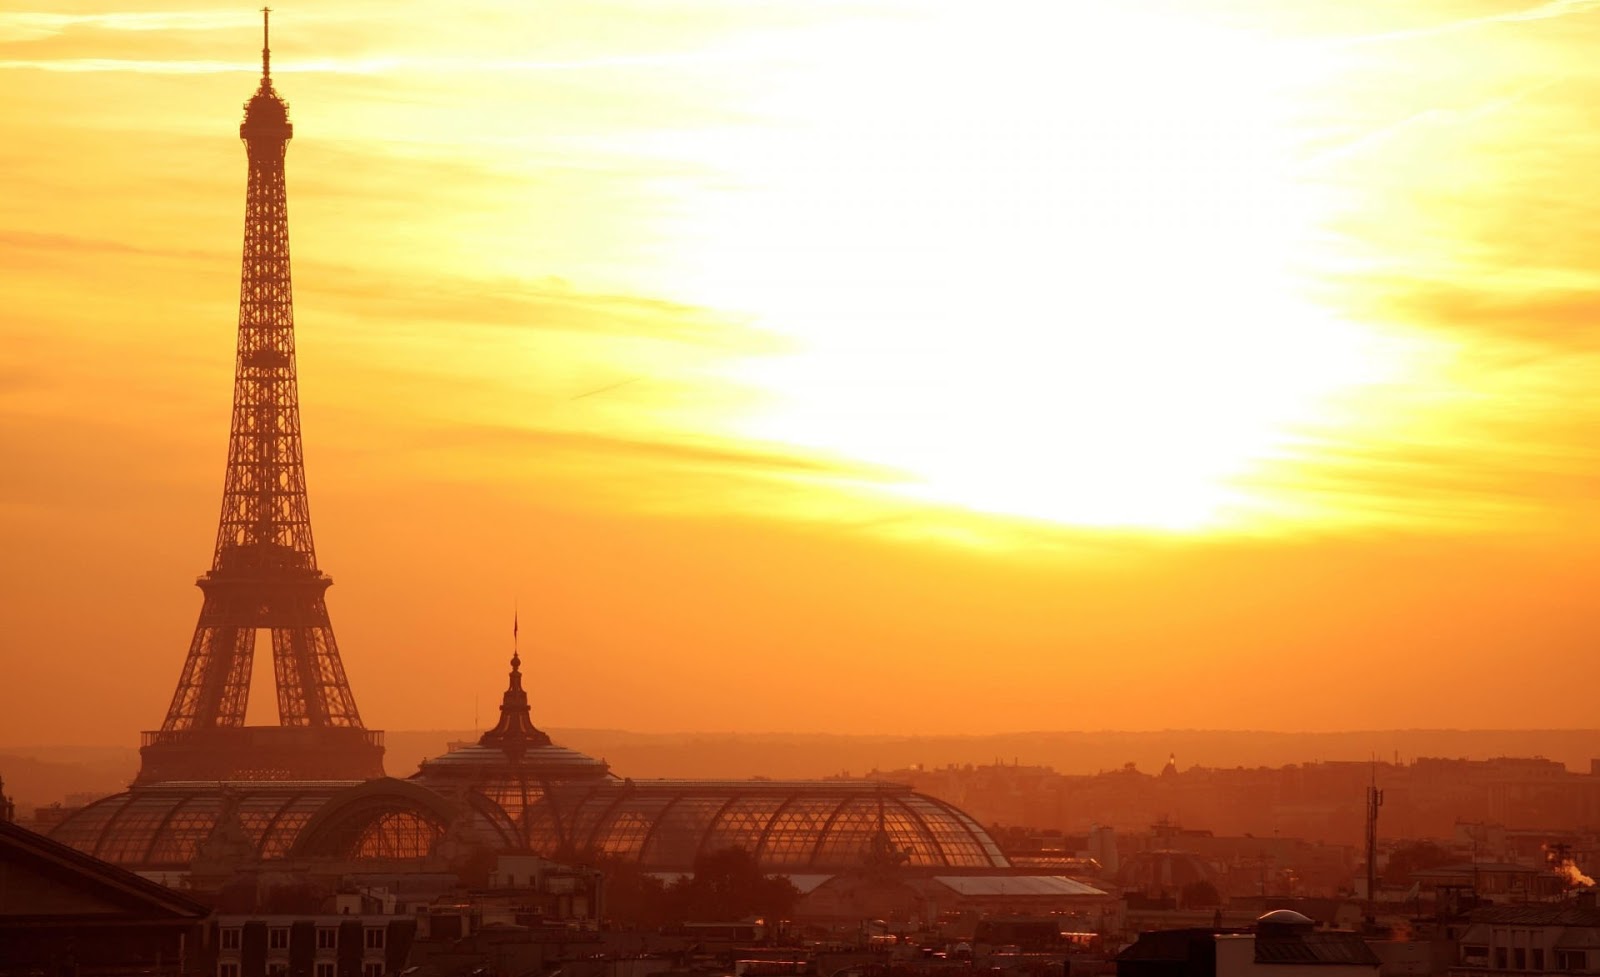 Care-we: Eiffel tower at sunset